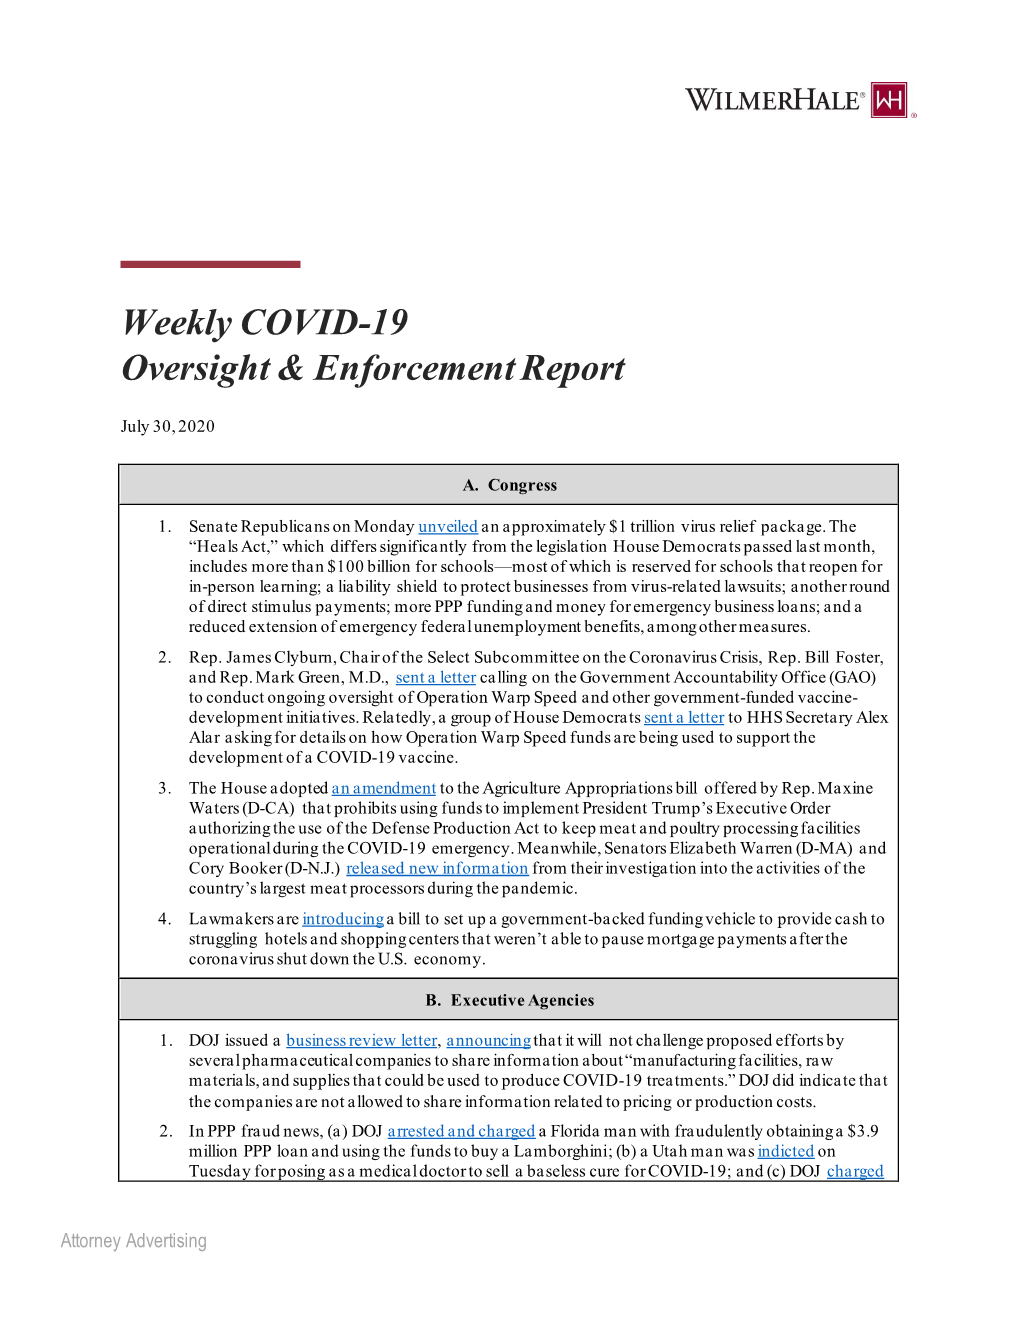 Weekly COVID-19 Oversight & Enforcement Report